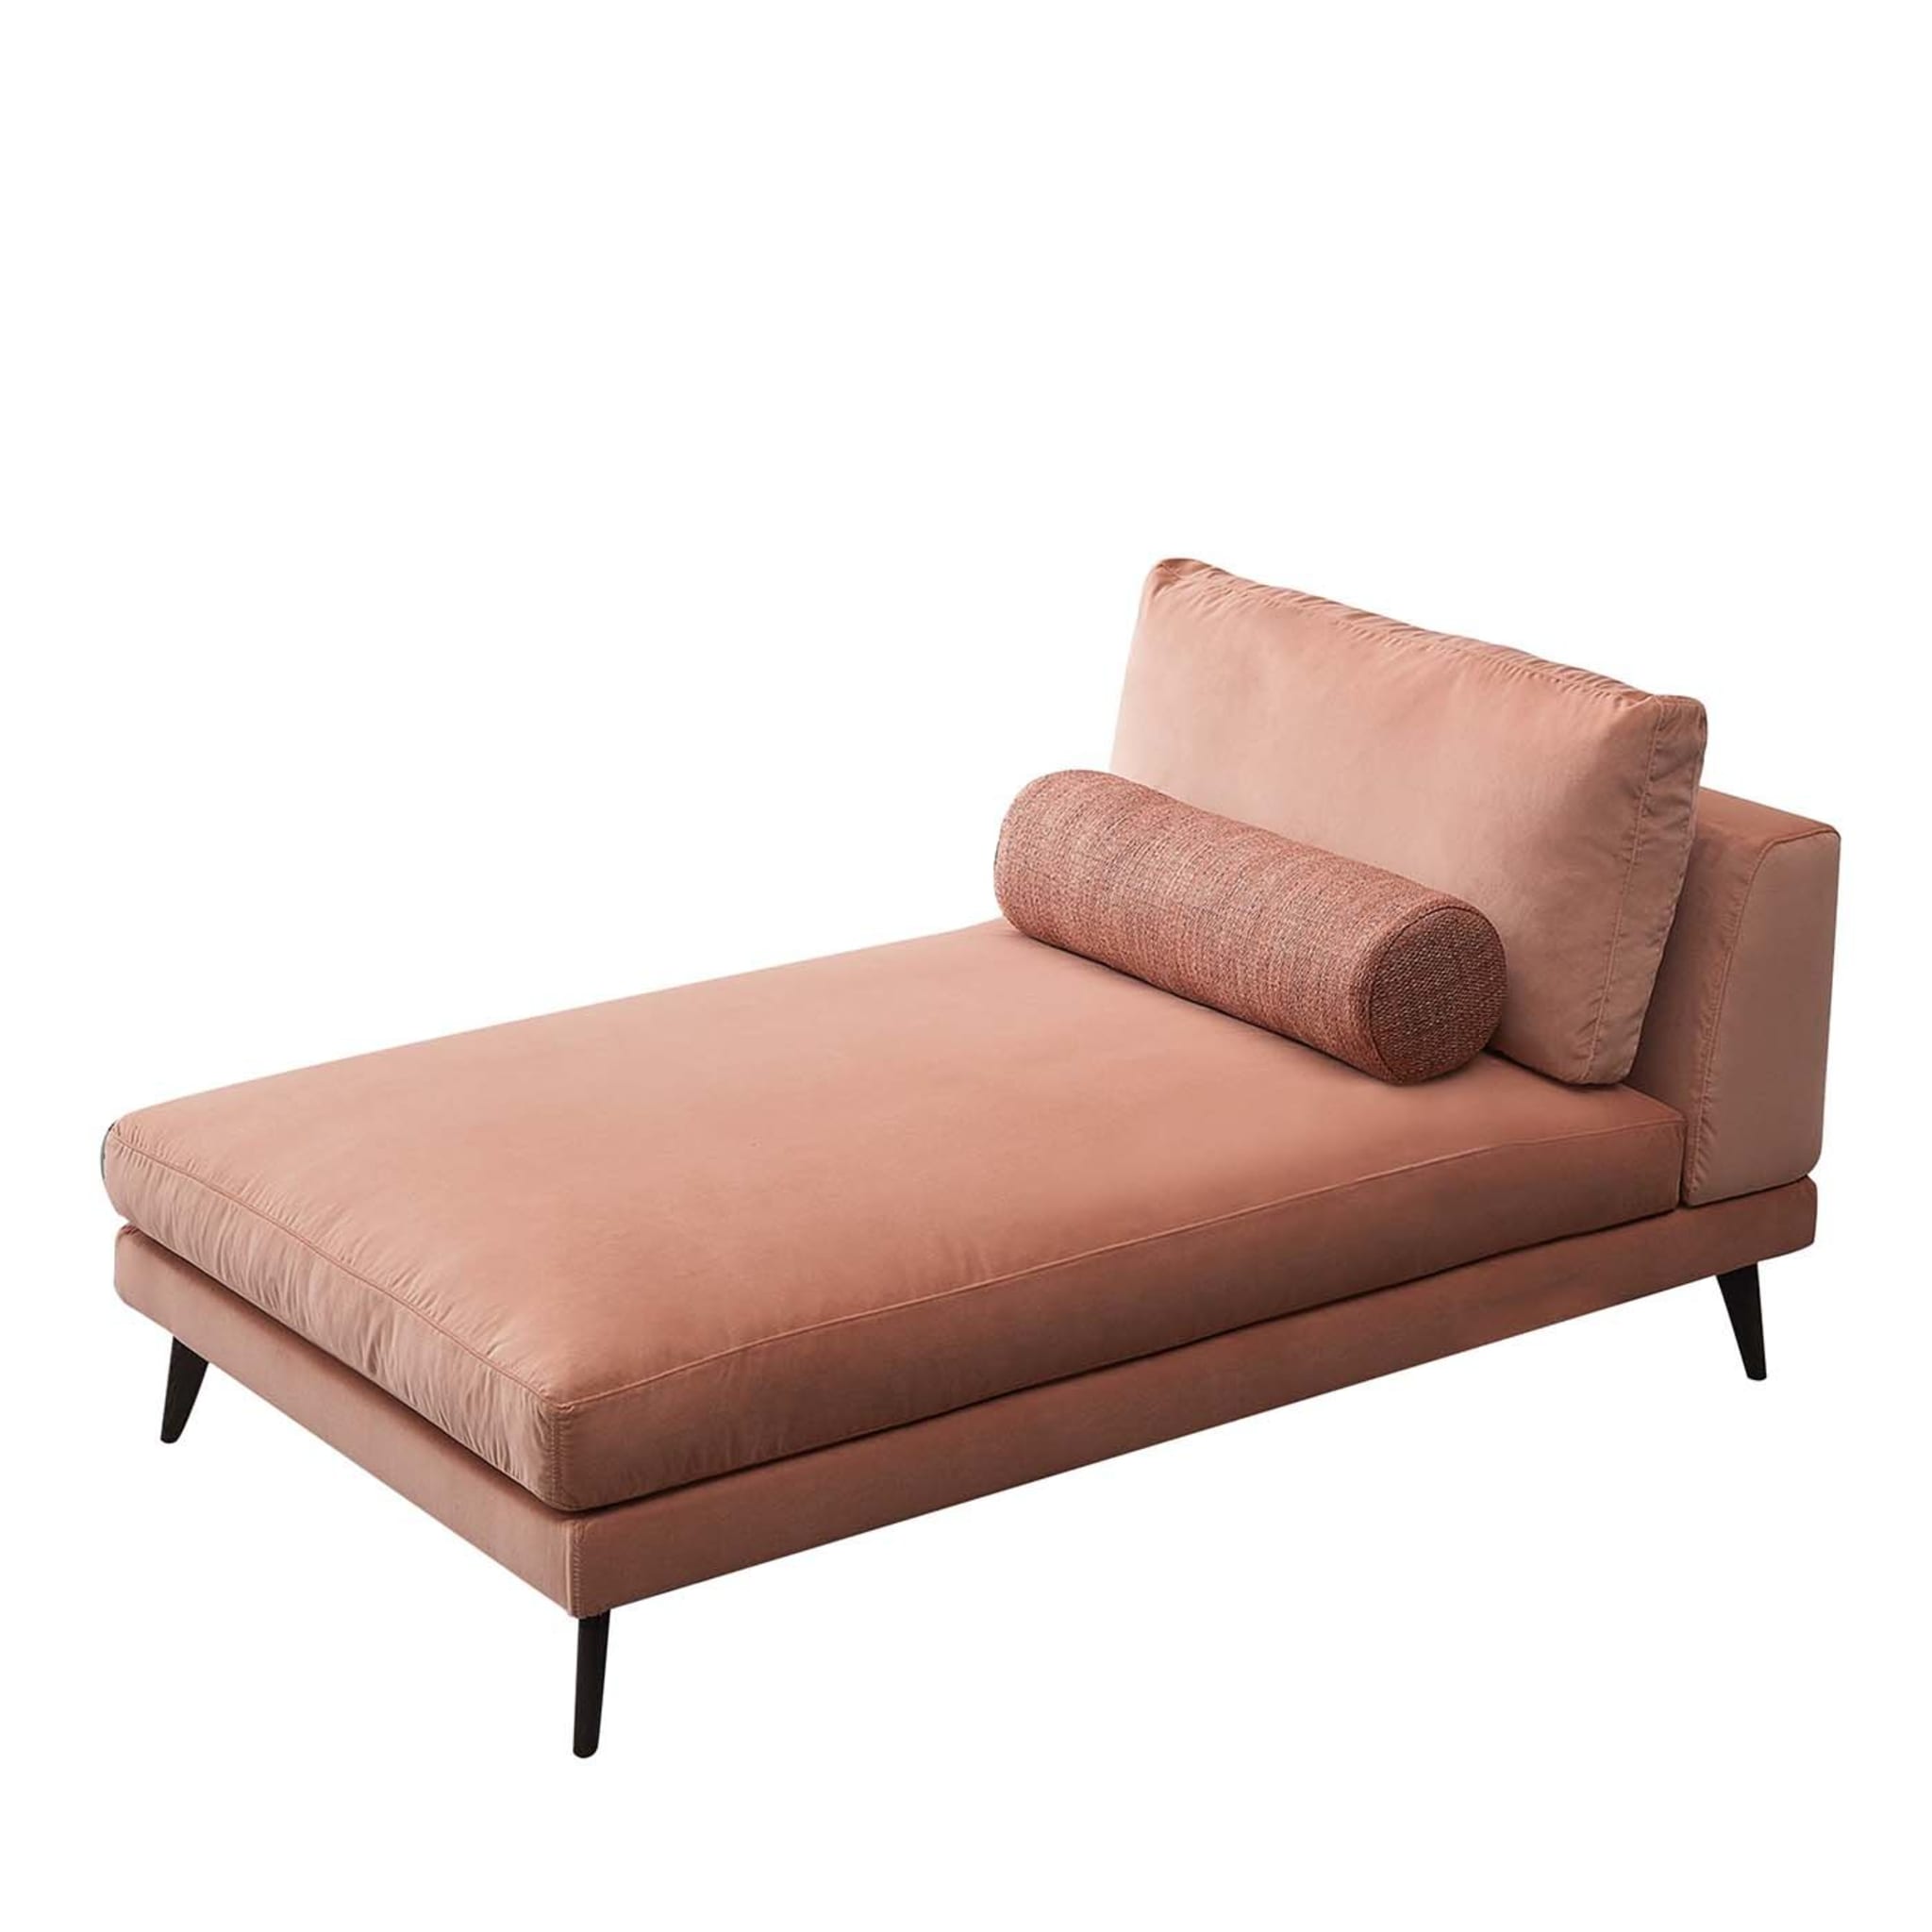 Nelson Pink Chaise Longue - Main view